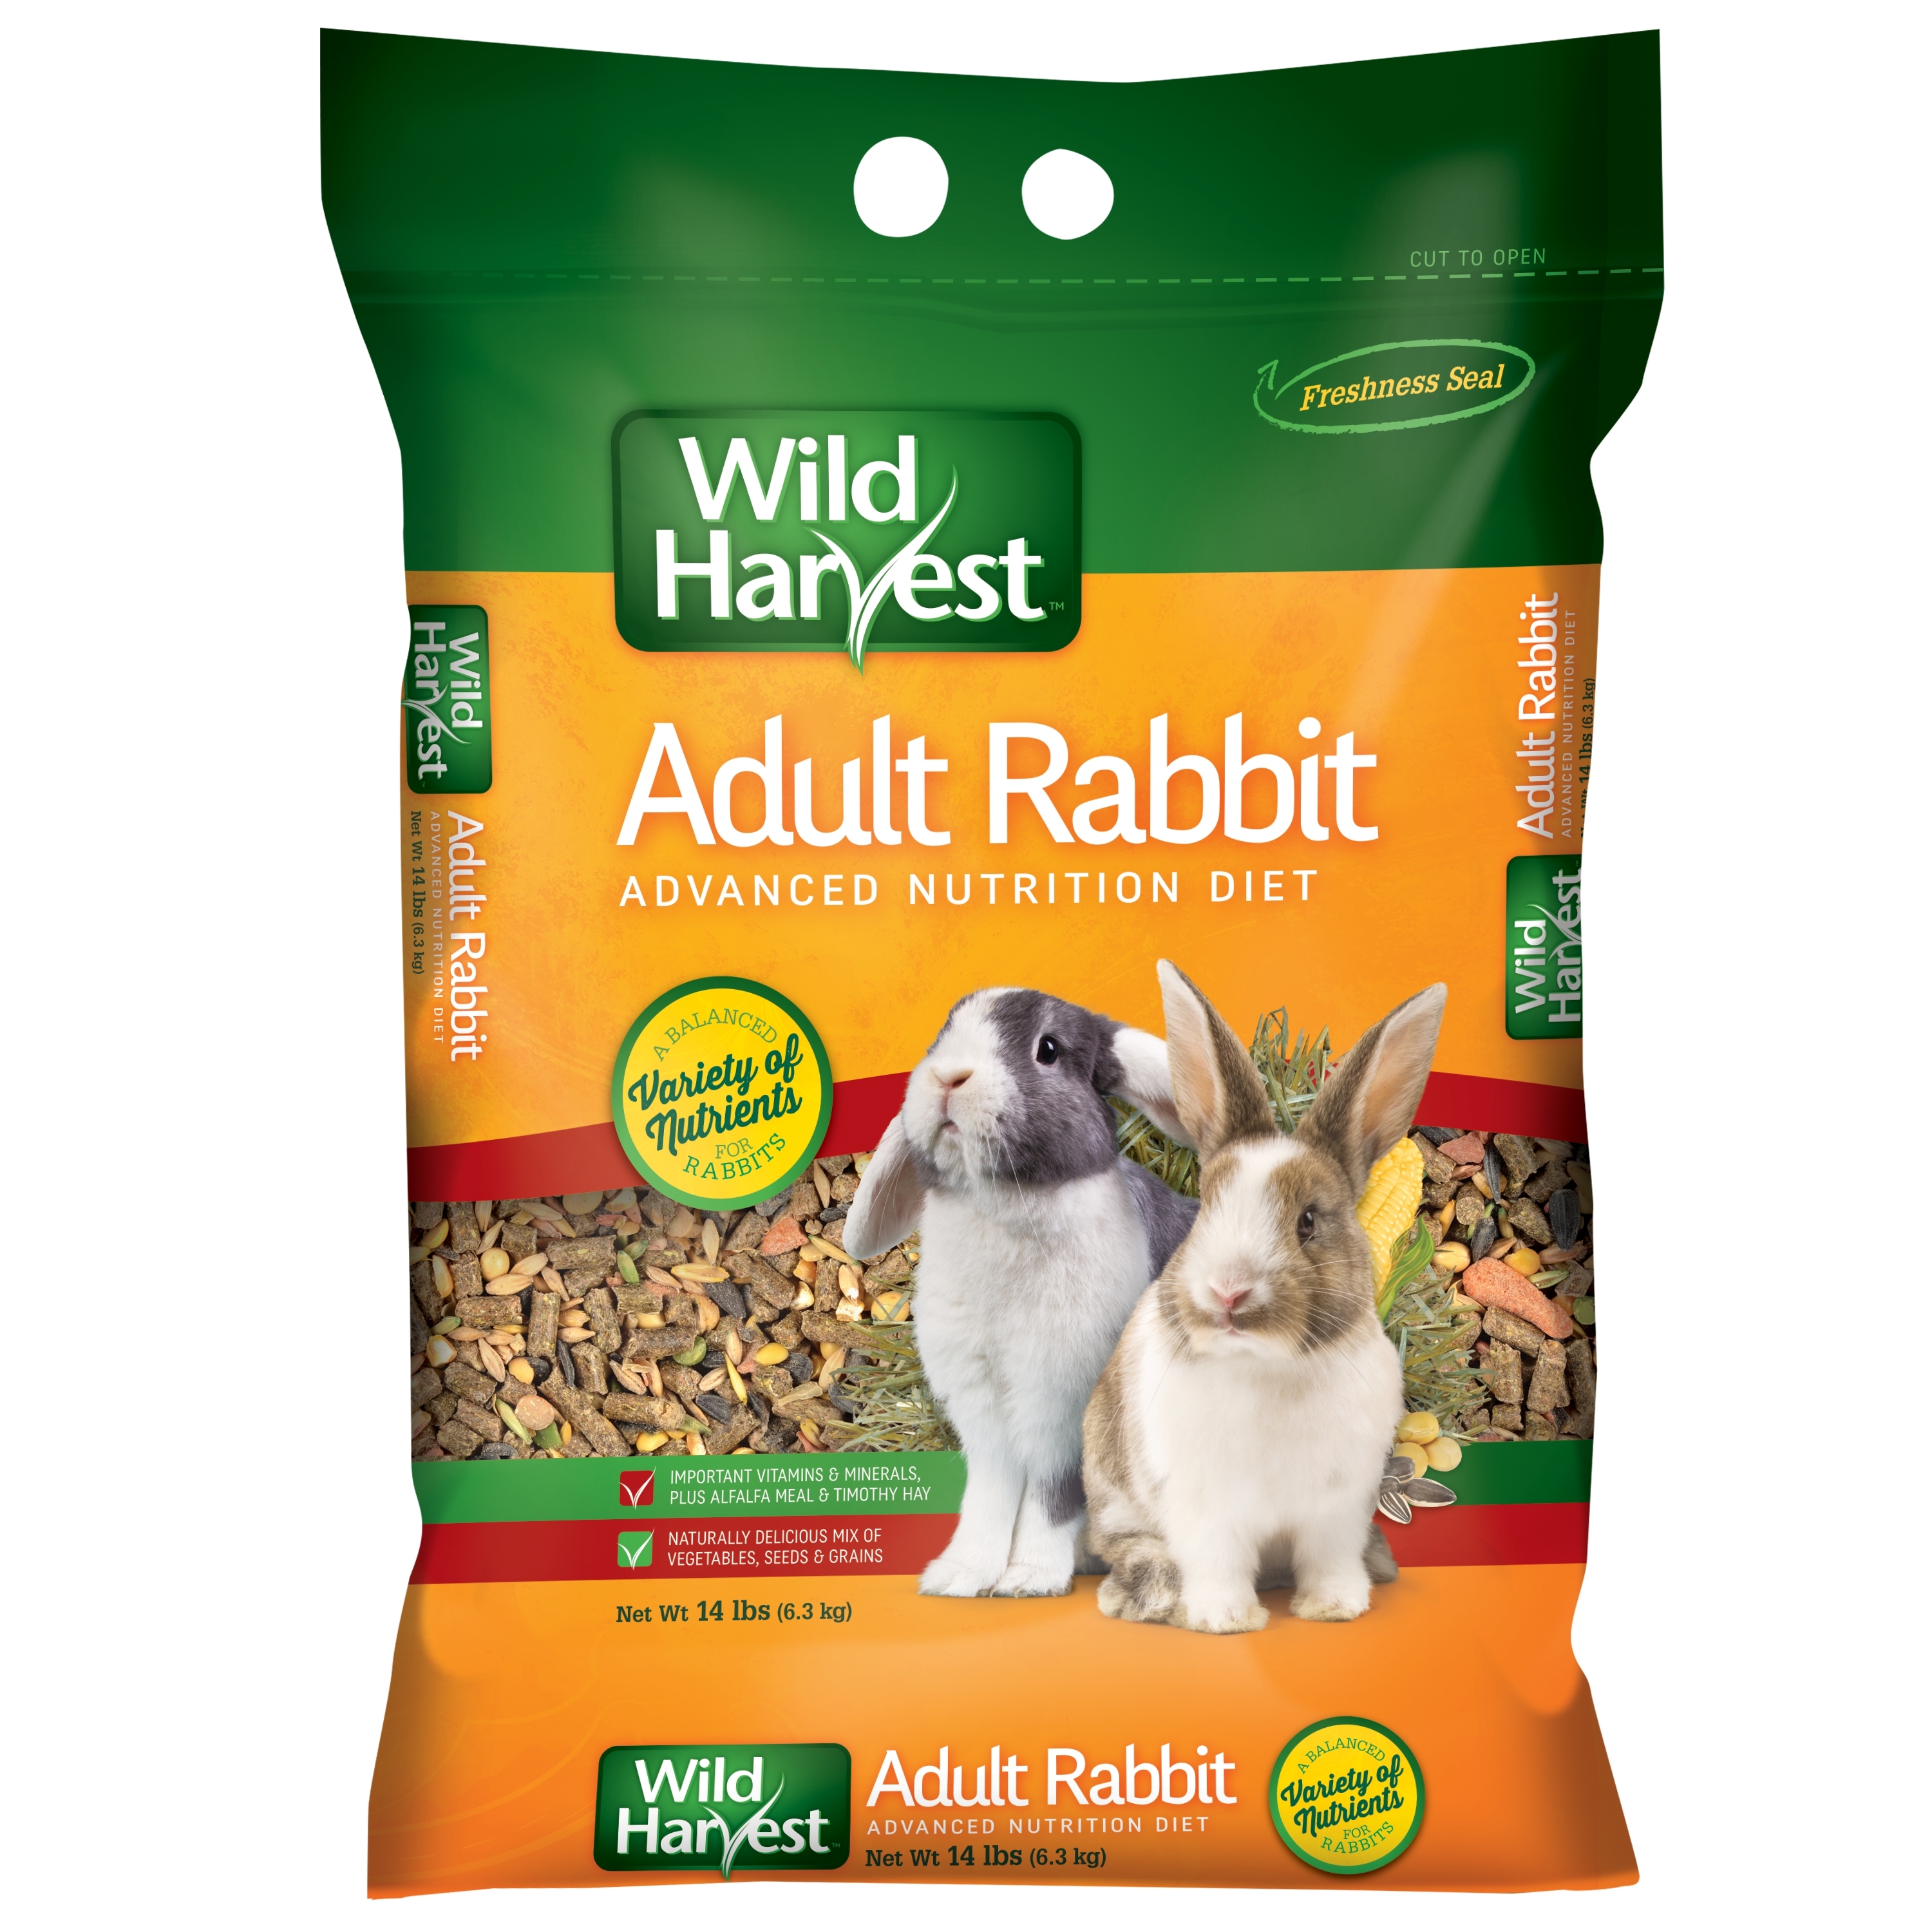 Wild Harvest Advanced Nutrition Adult Rabbit 14 Pounds, Complete and Balanced Diet - image 1 of 7